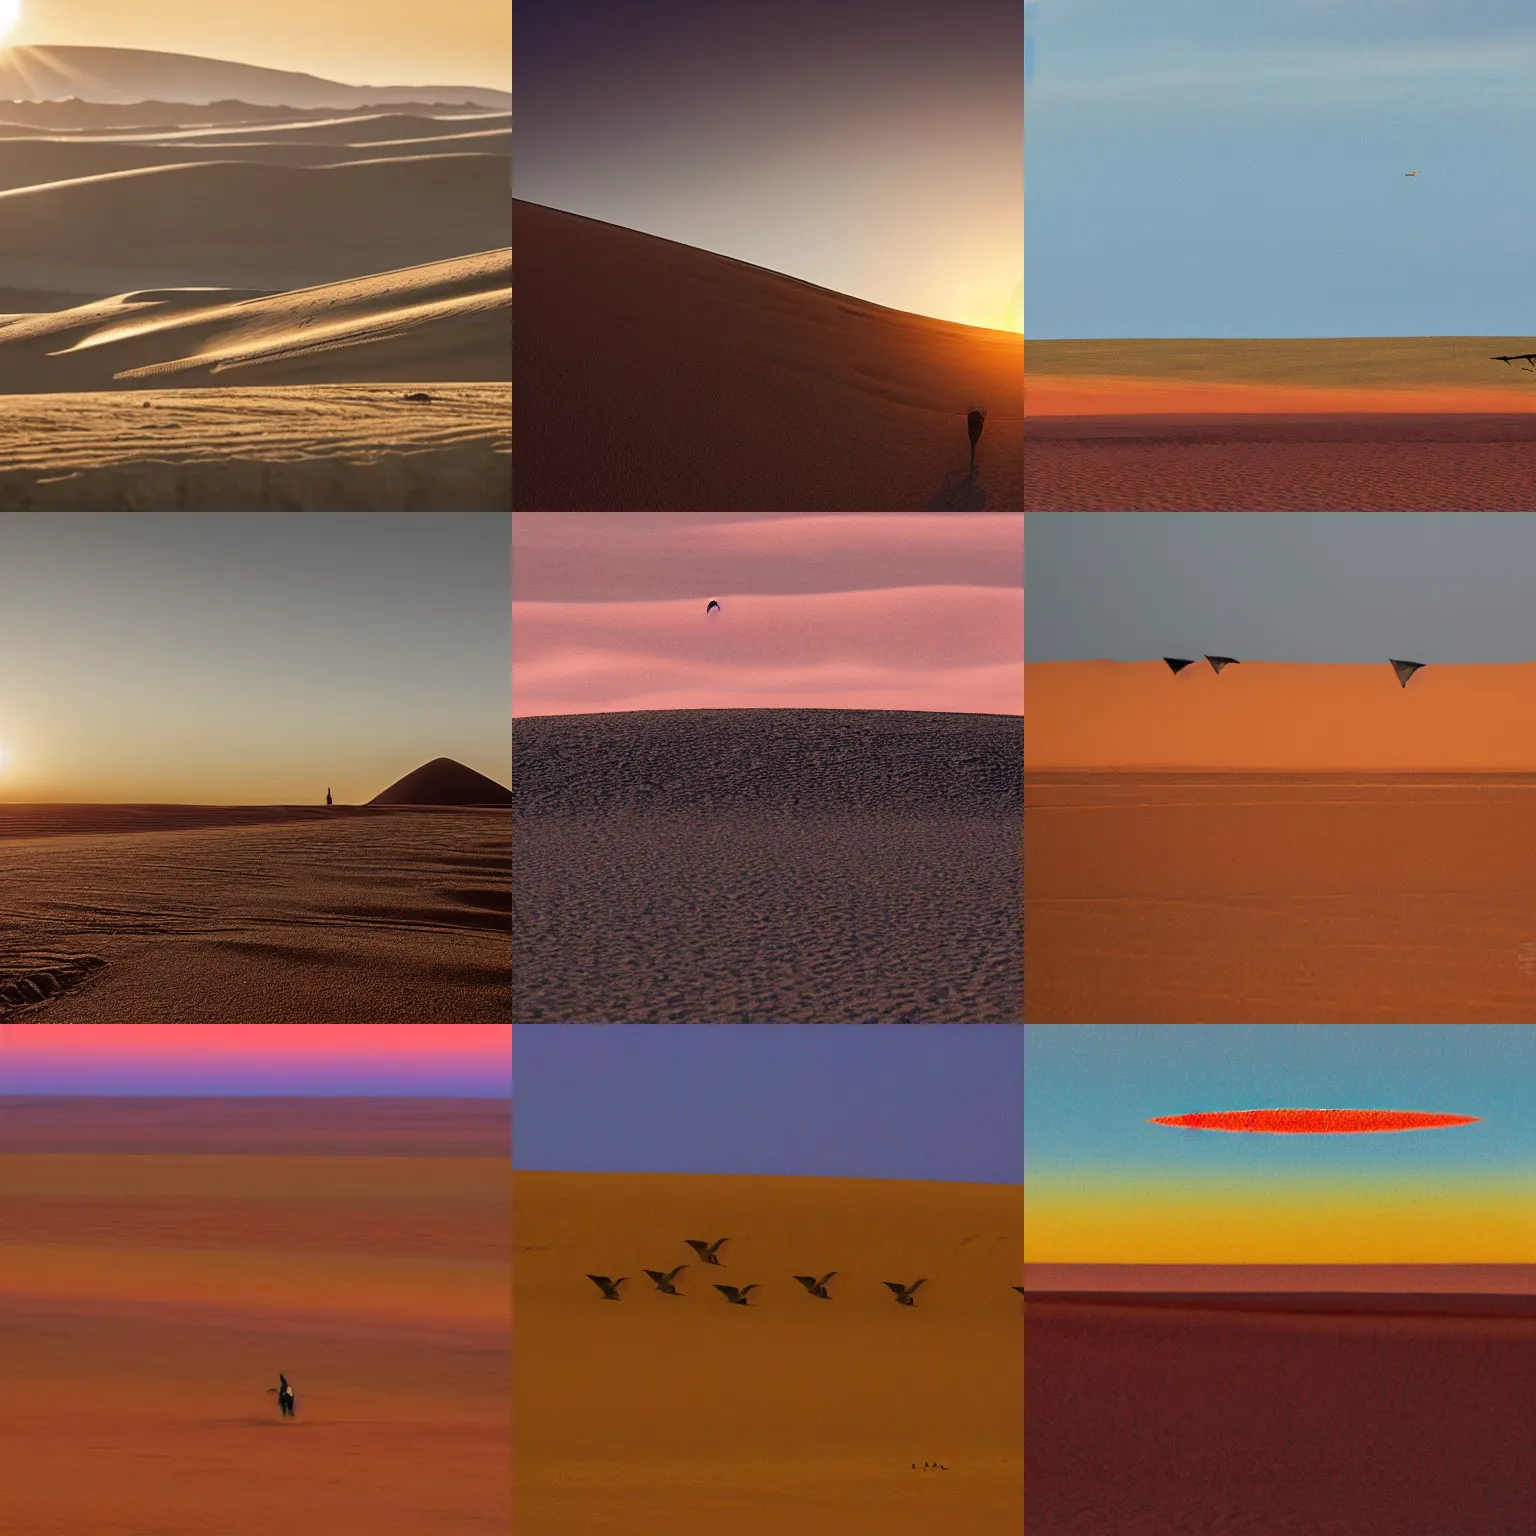 Prompt: thropter in flight from dune, sweeping landscape, setting intense sun. Caped figures in the distance on the ground